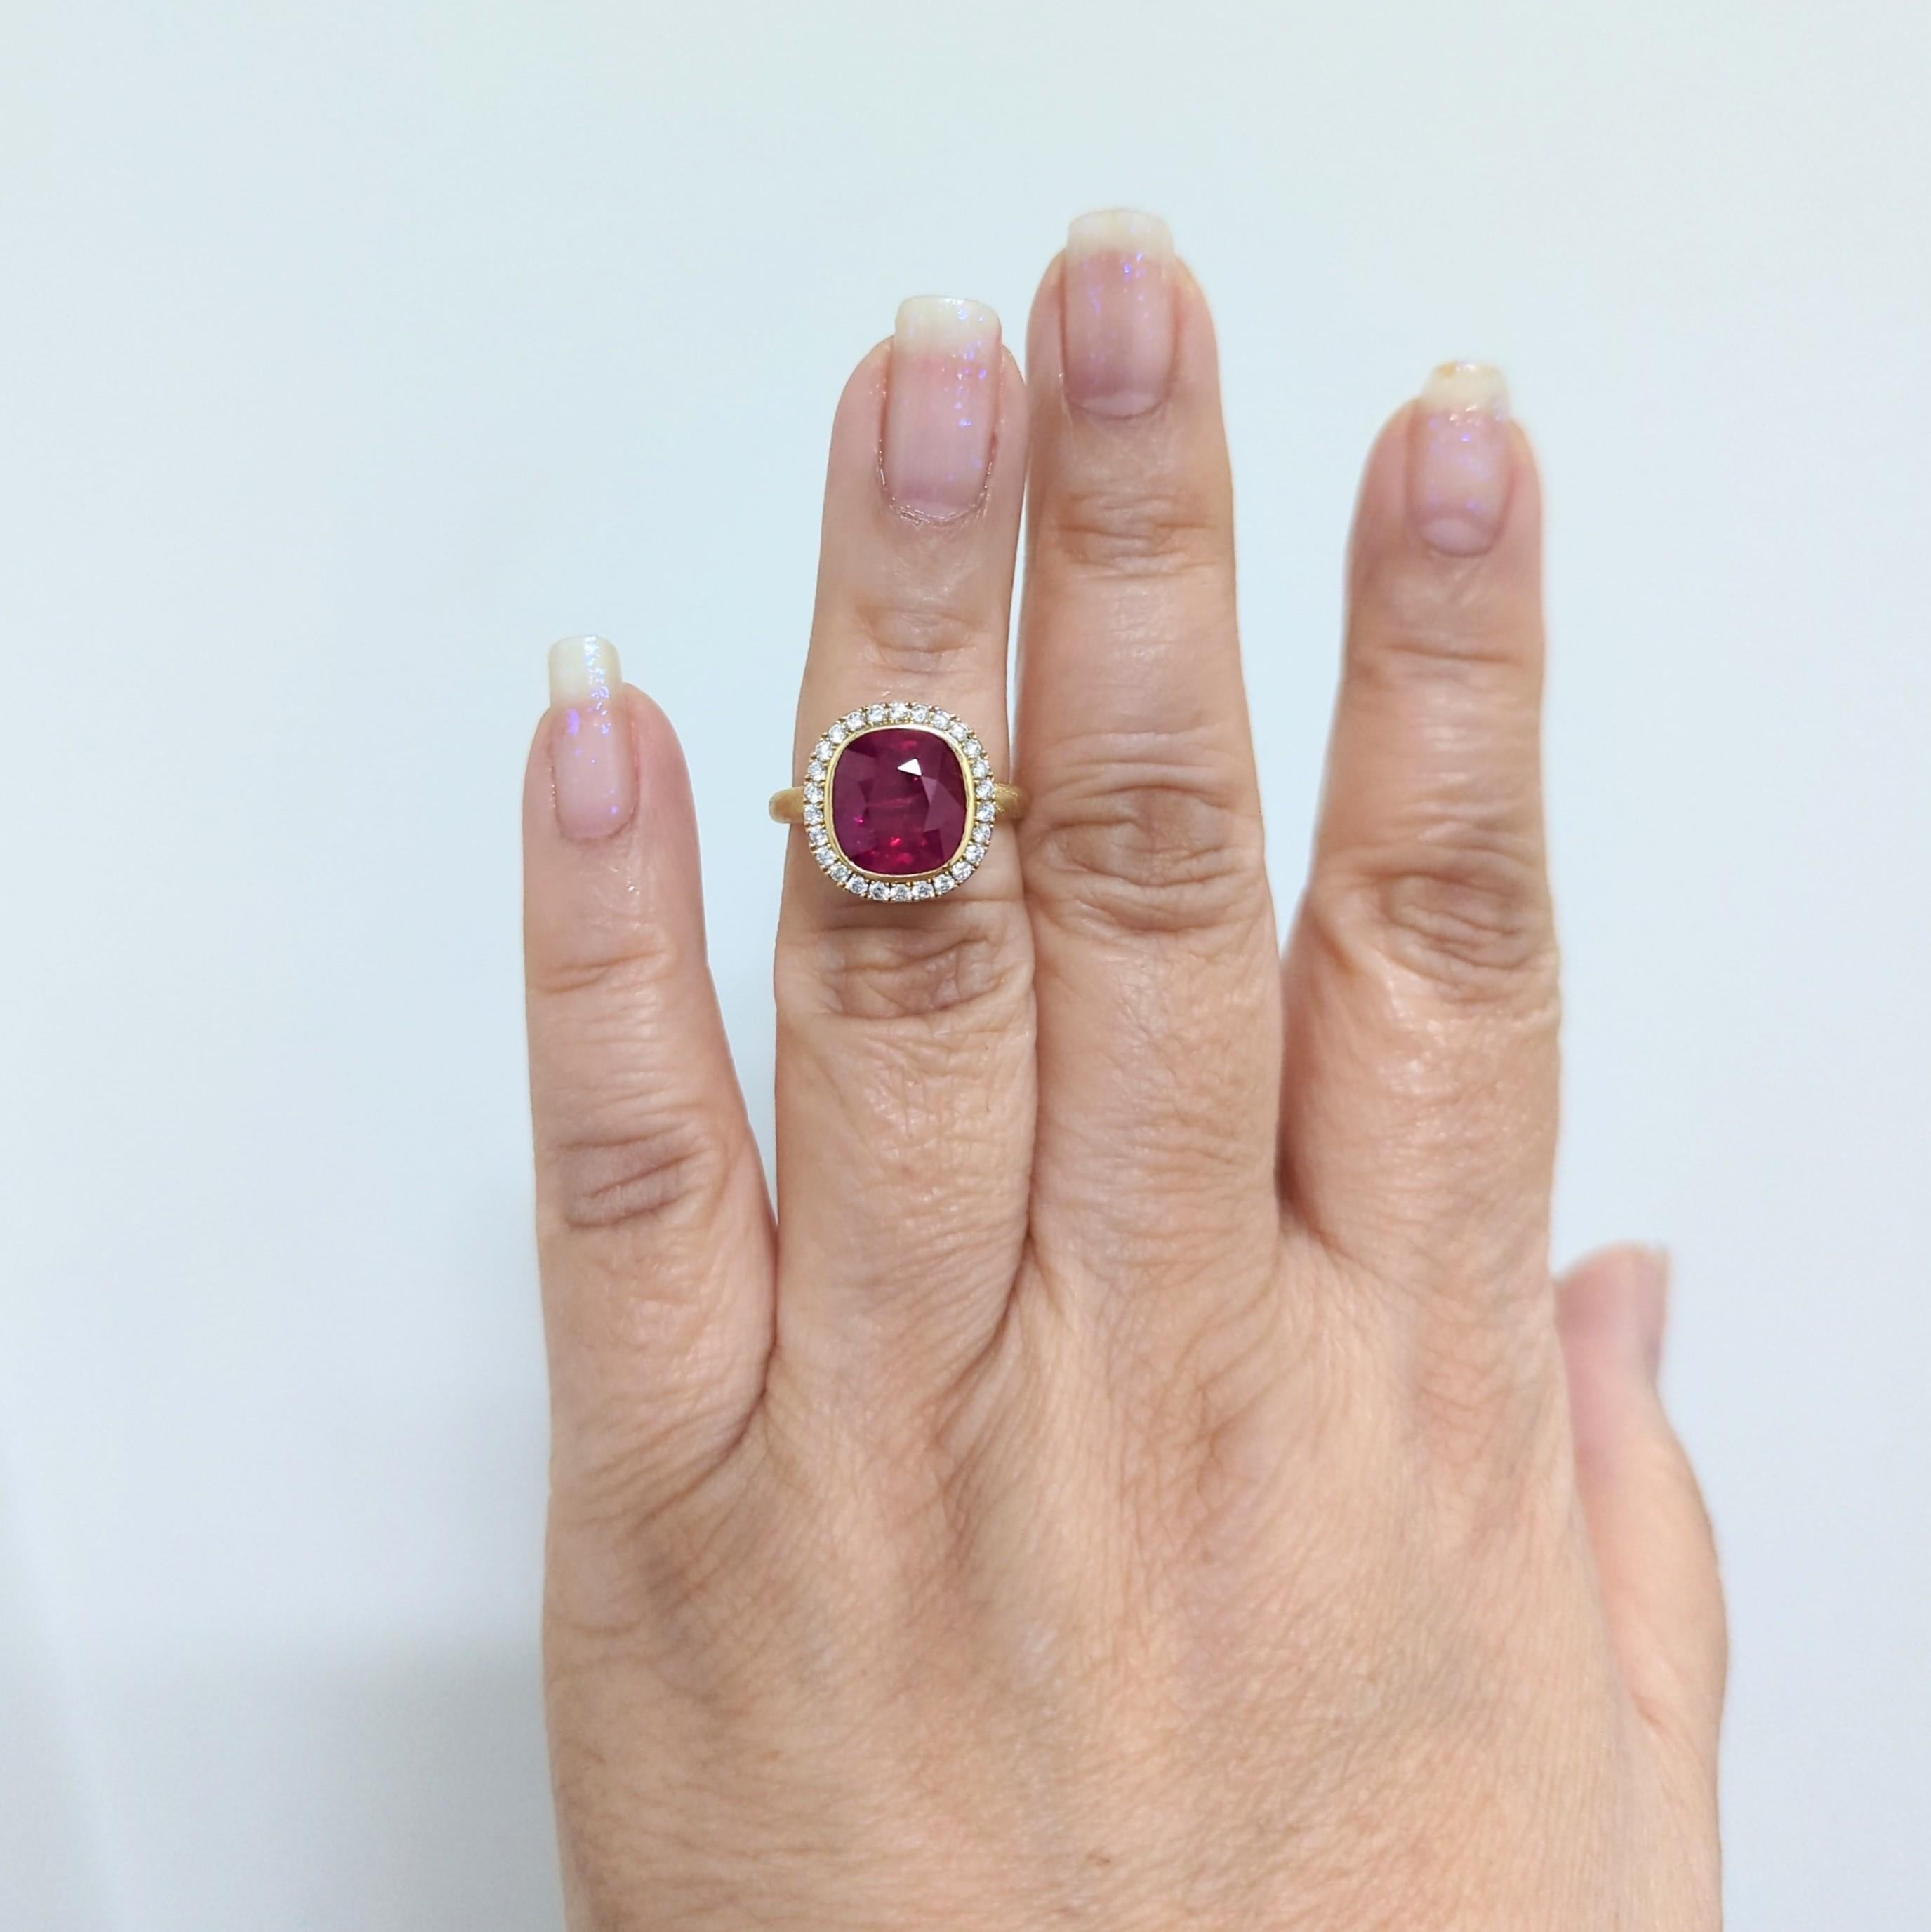 Gorgeous deep red 4.32 ct. Mozambique unheated ruby cushion with 0.42 ct. good quality white diamond rounds.  Handmade in 18k yellow gold.  Ring size 6.5.  CDC certificate included.